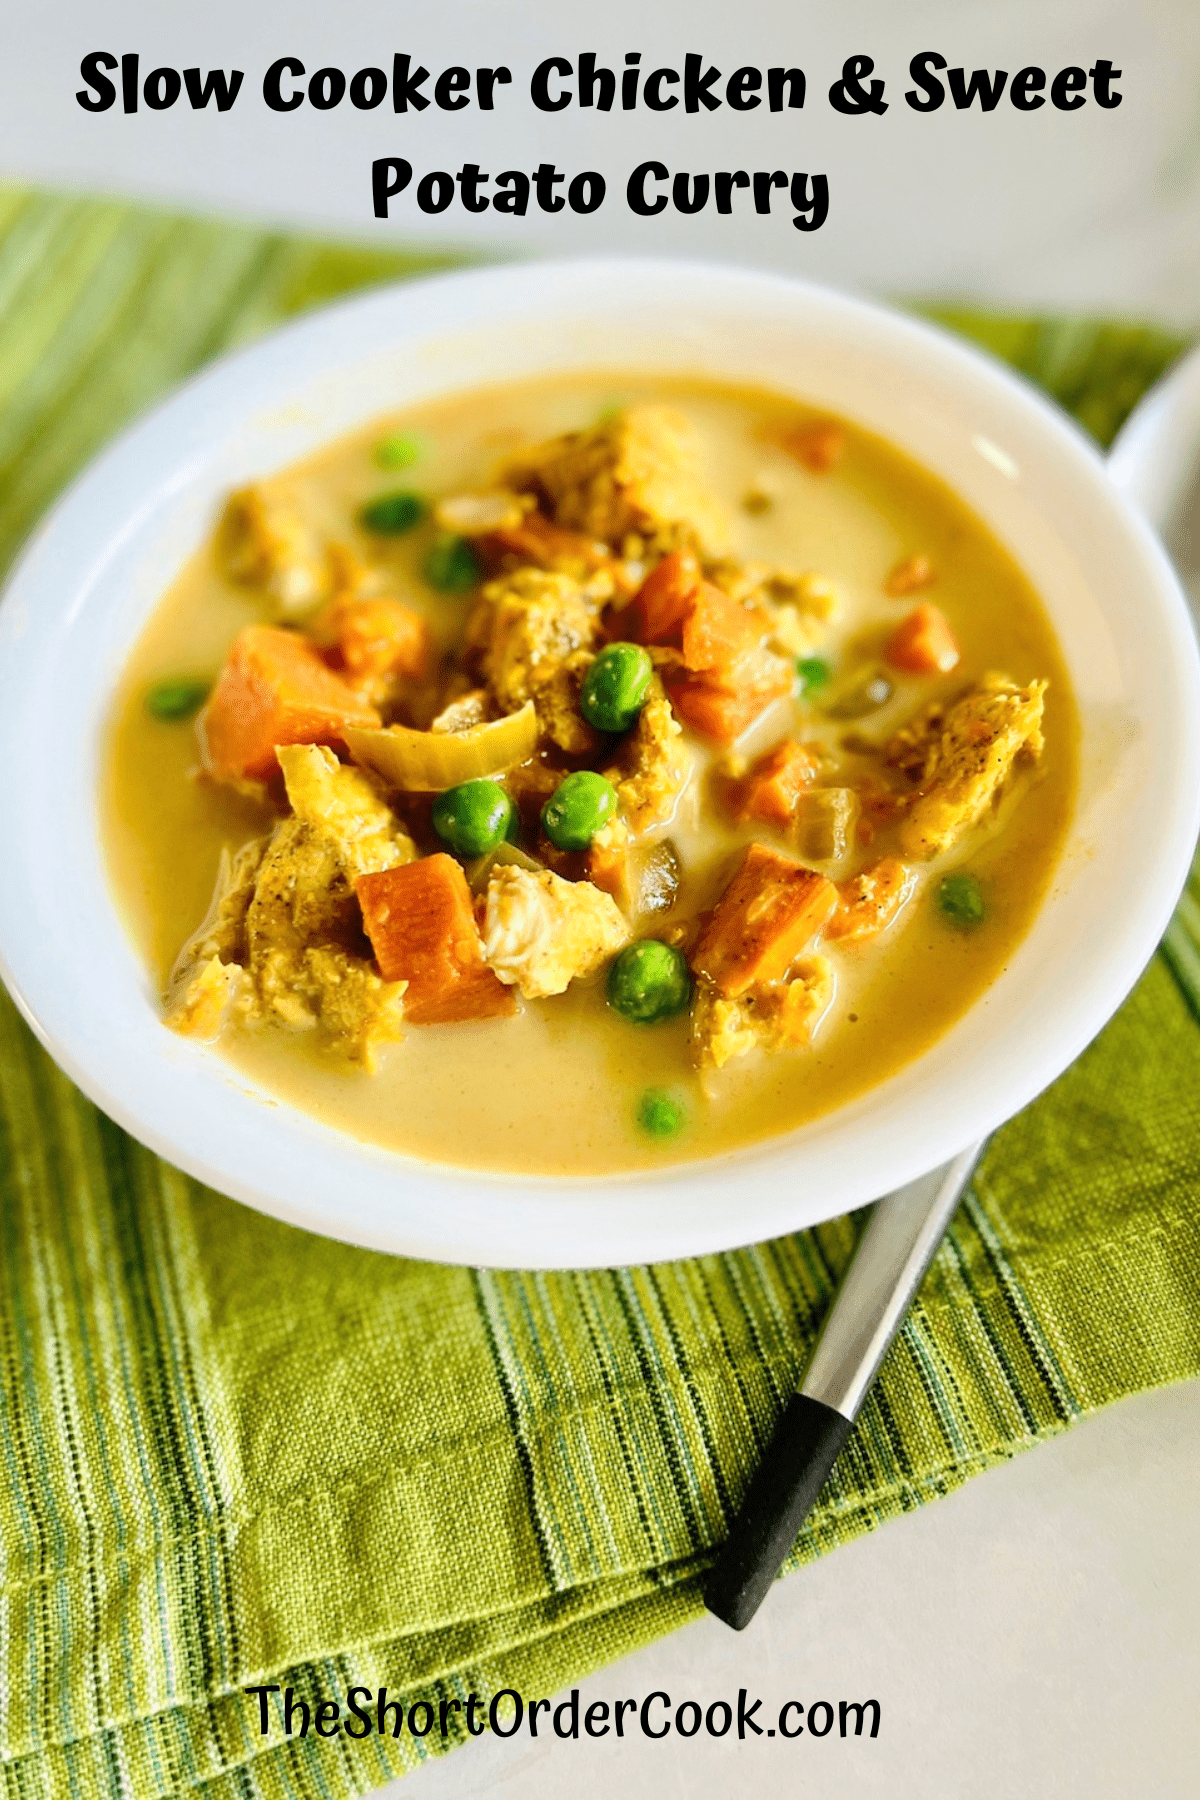 White bowl filled with golden colored red Indian curry chicken with sweet potatoes.